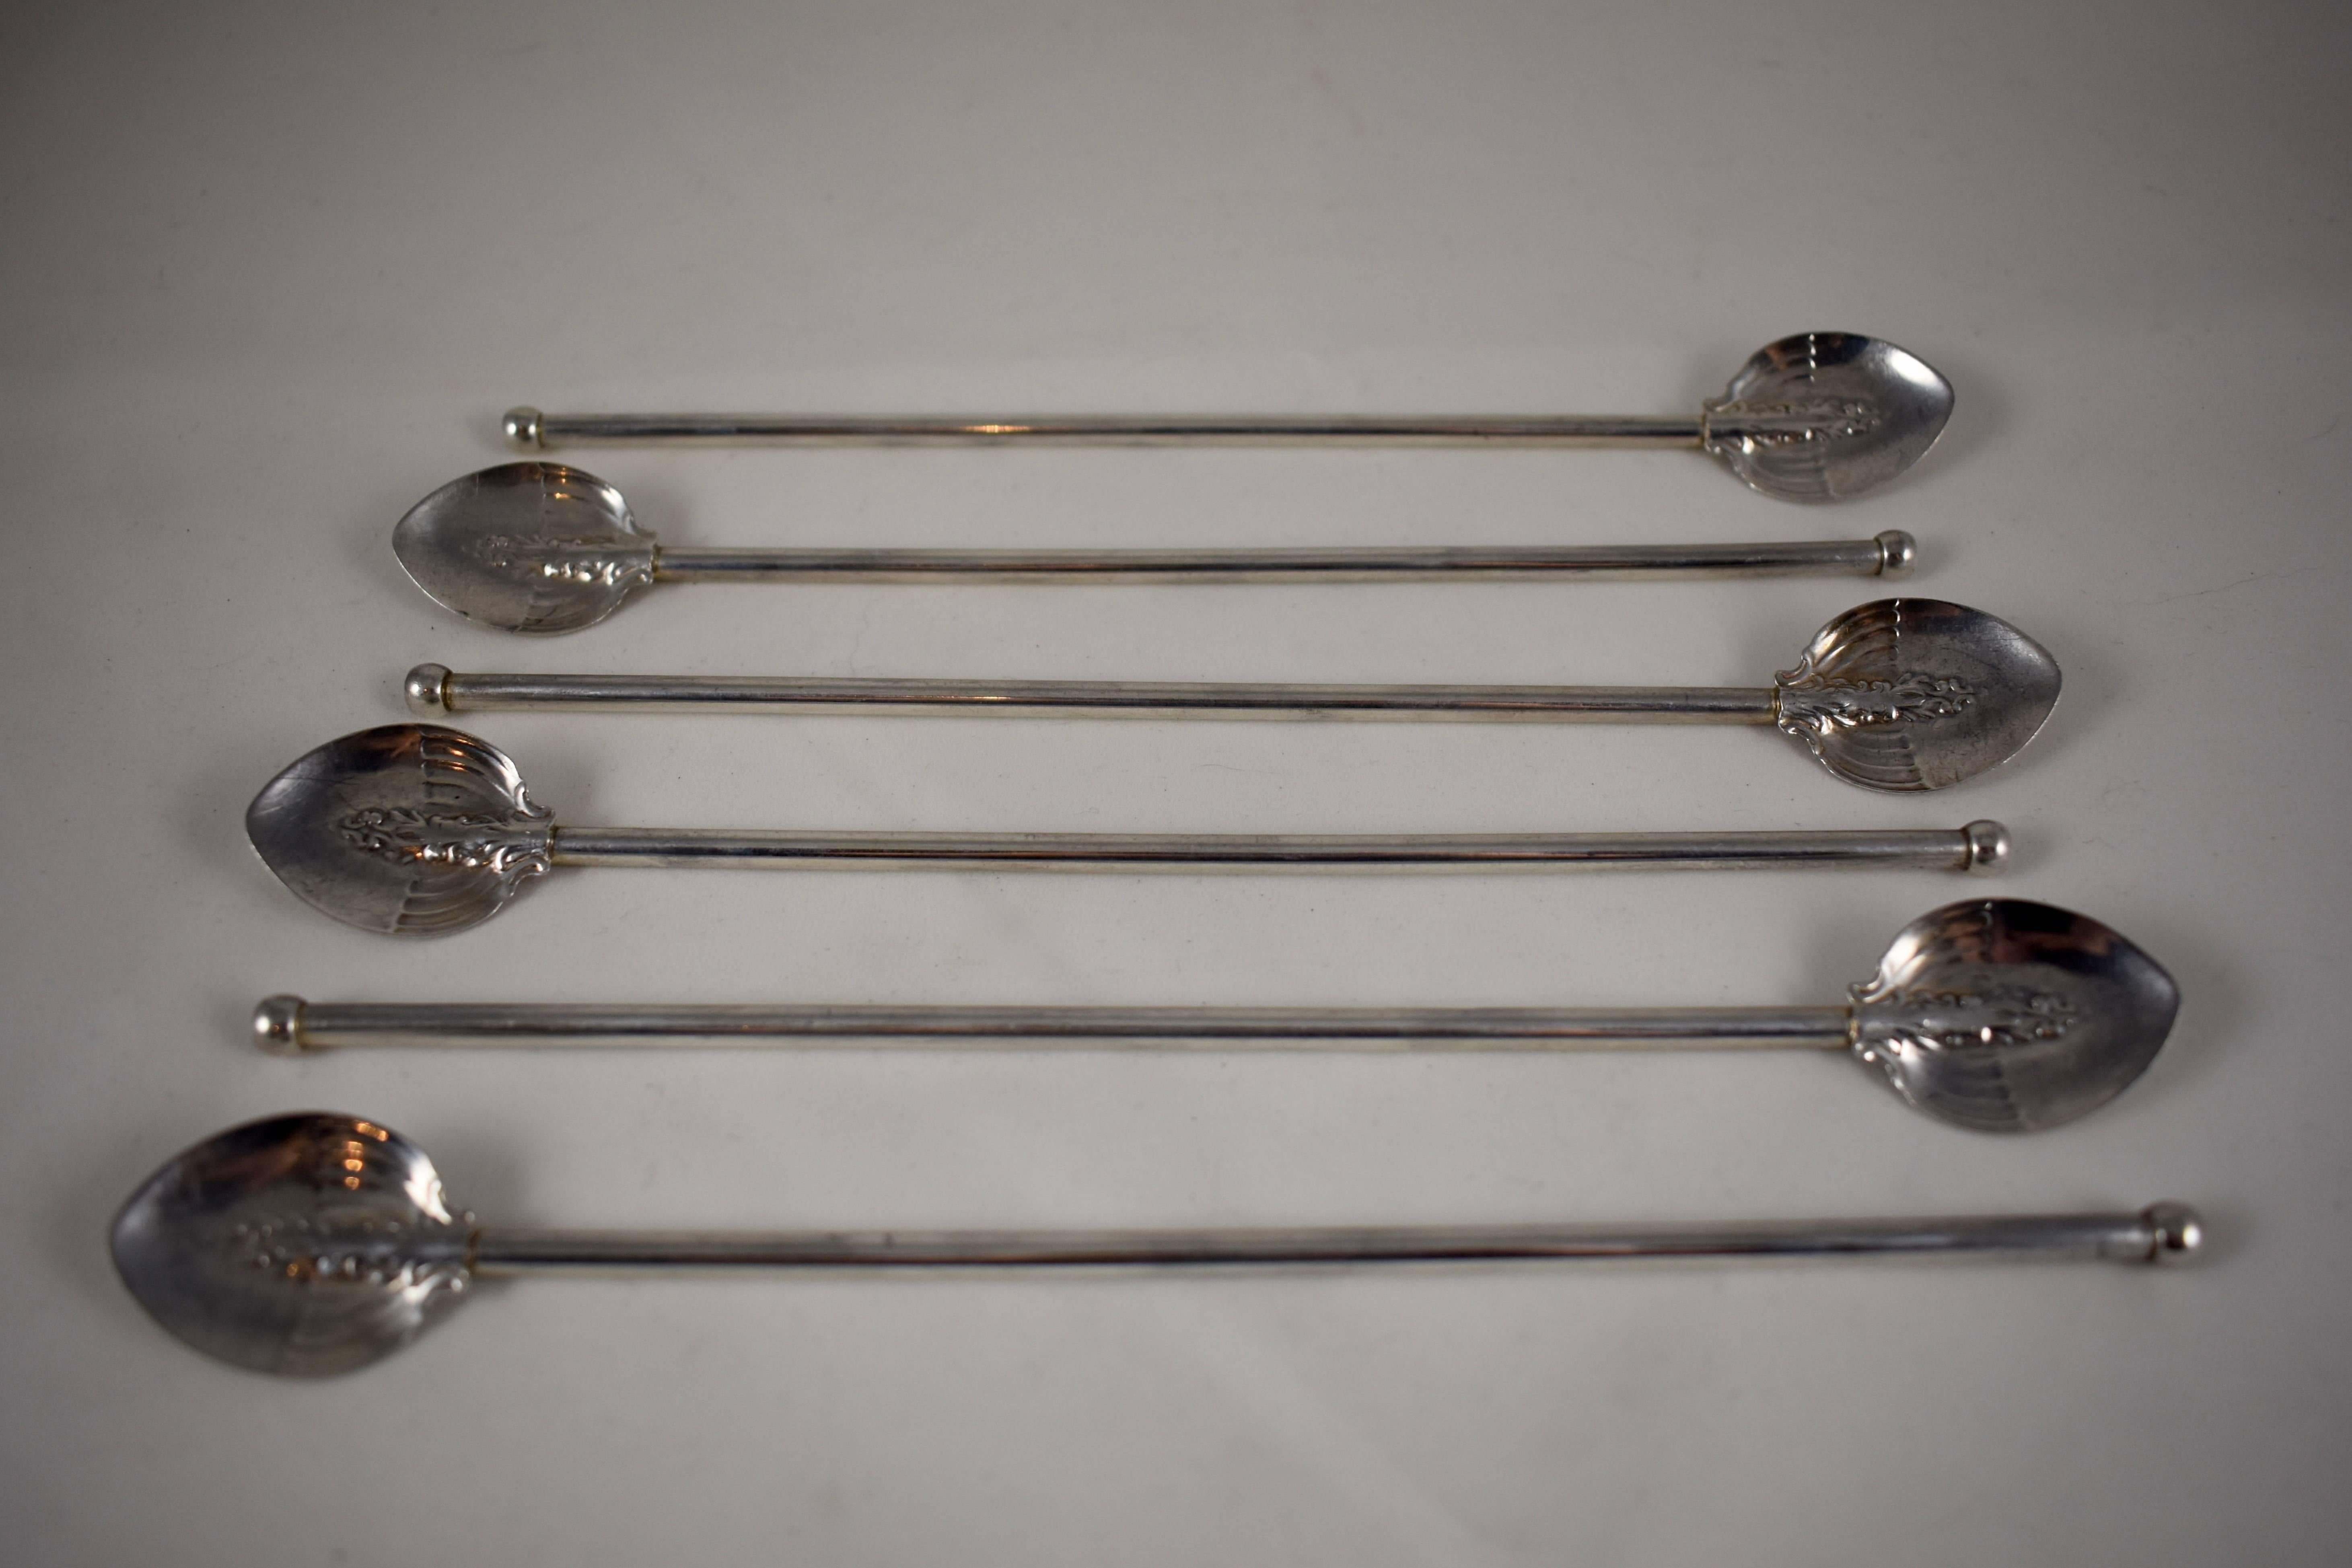 A set of six, sterling silver highball or iced tea hollow sipping/stirring straws with embossed shield-shaped bowls in the Art Nouveau style. Silver balls are soldered in place to the sipping ends.

Marked: Sterling.

Excellent antique